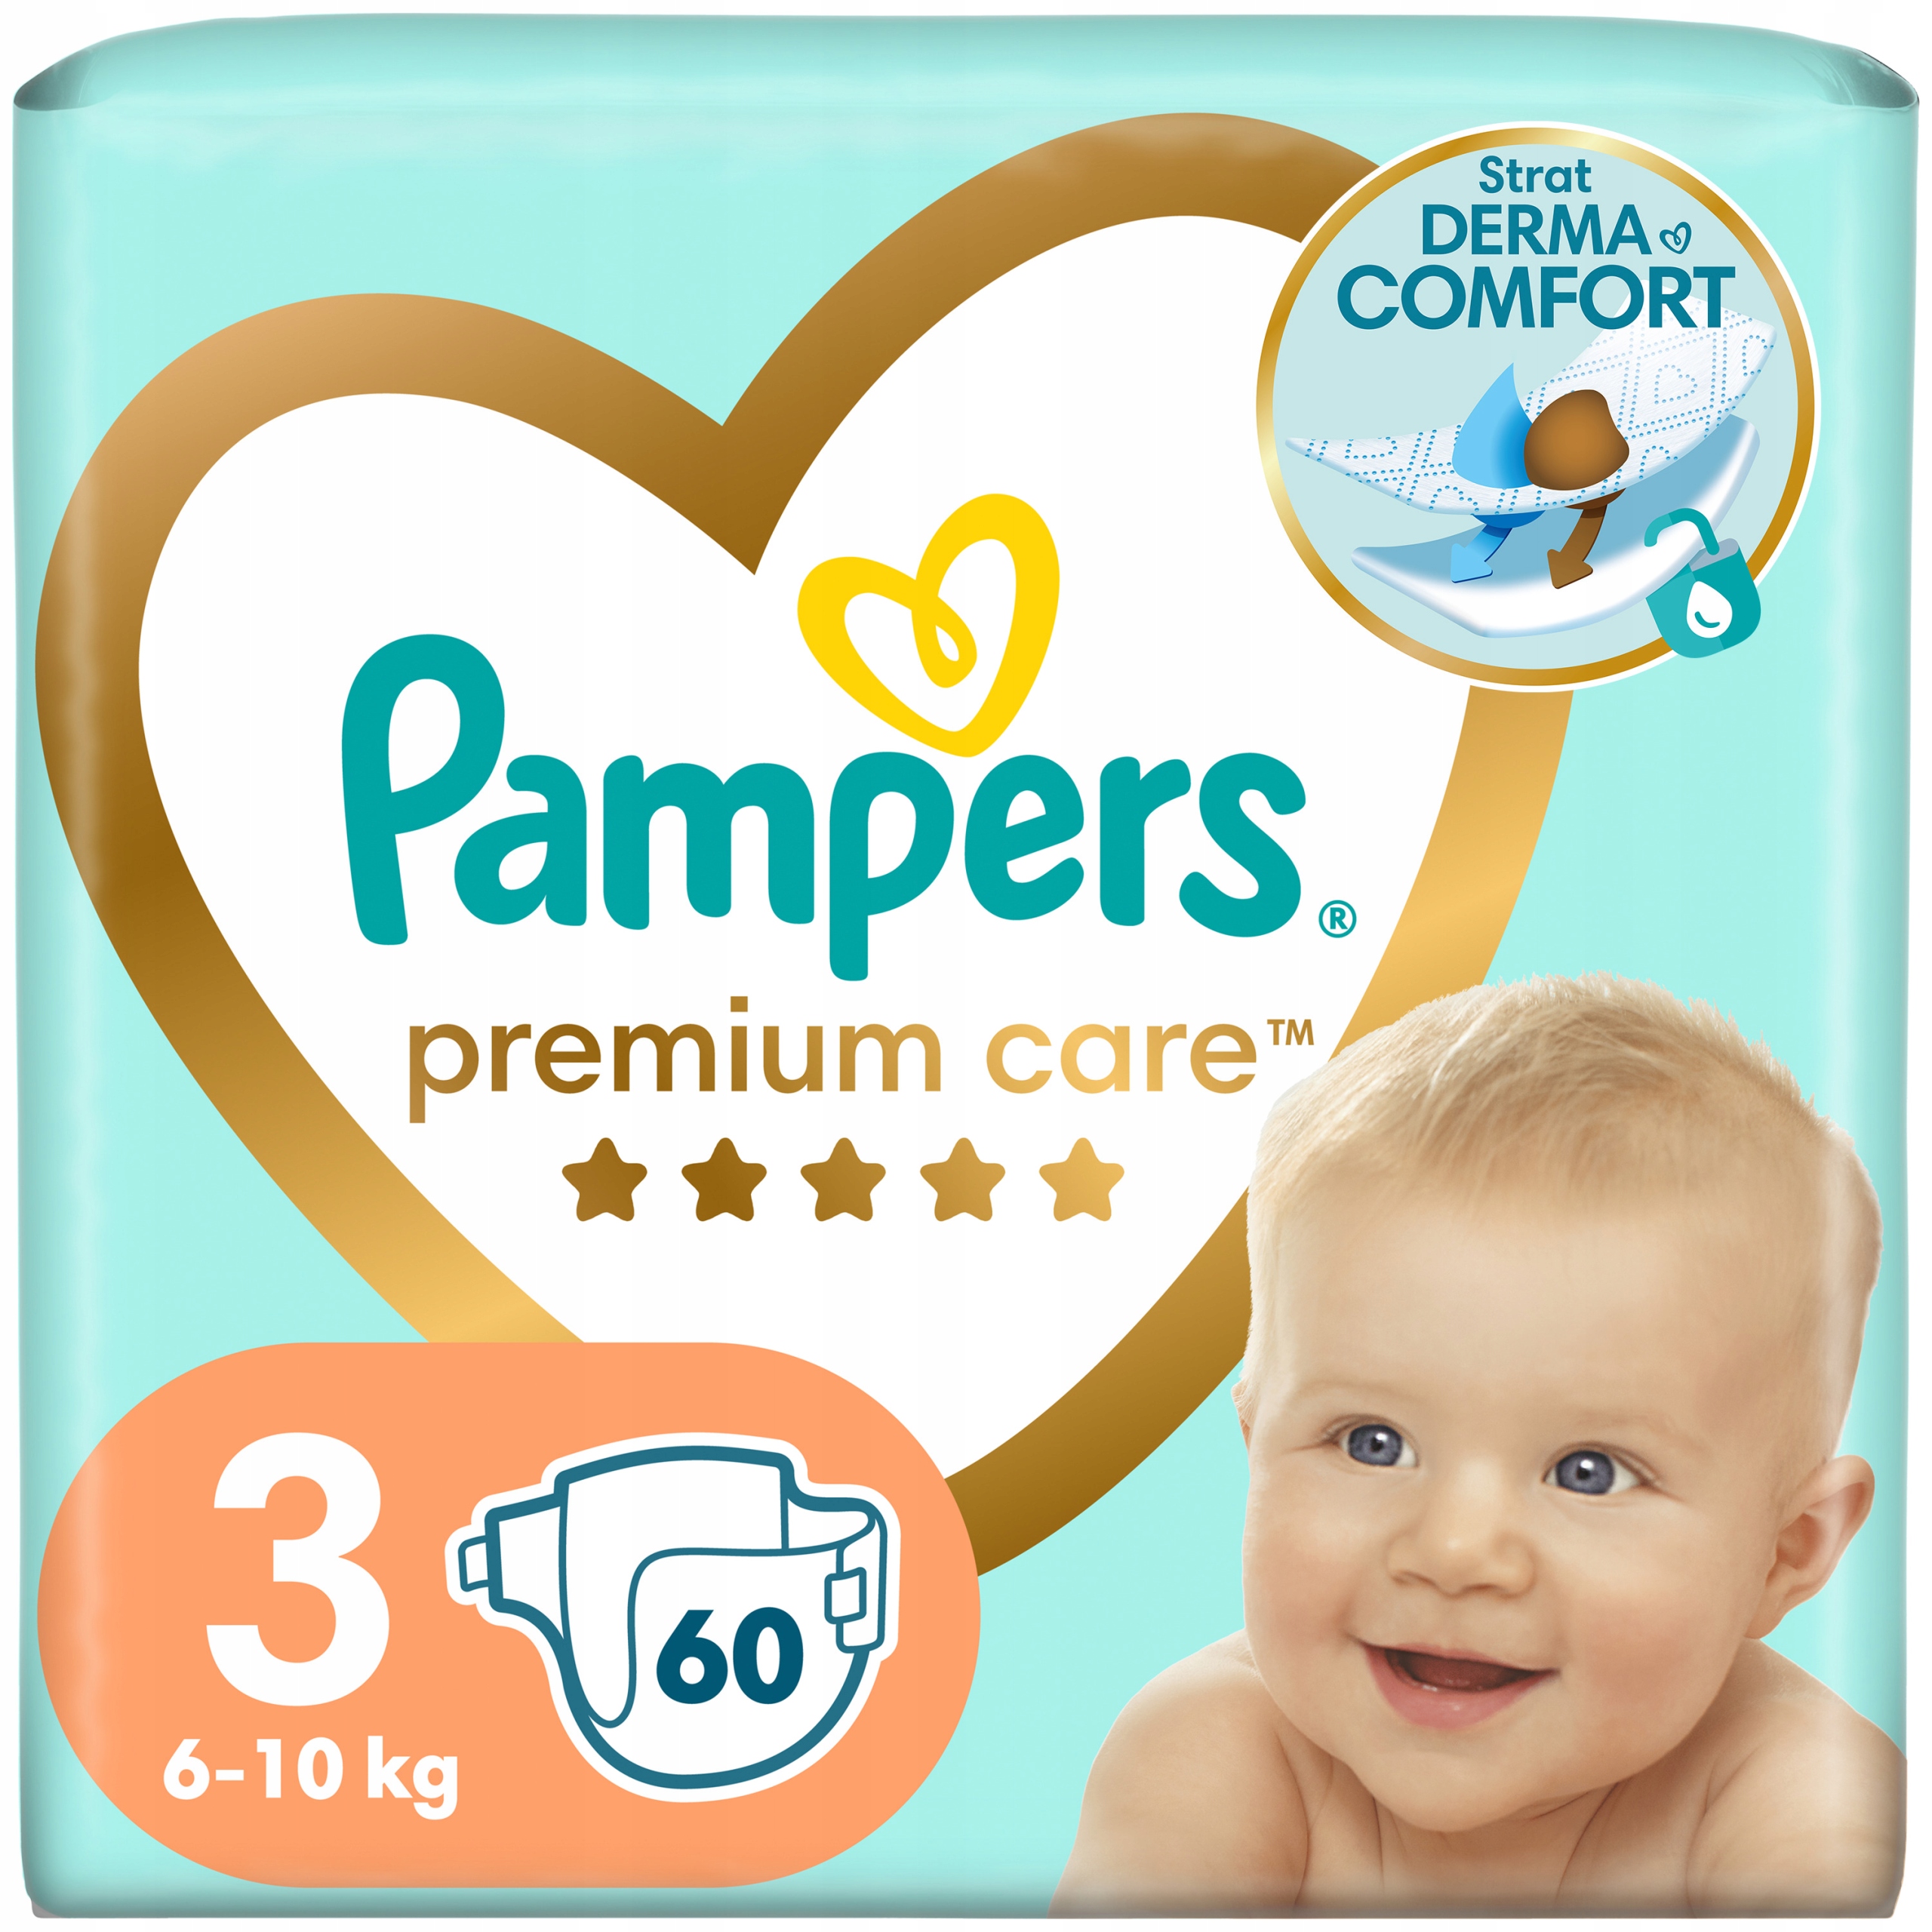 pampers fred flo